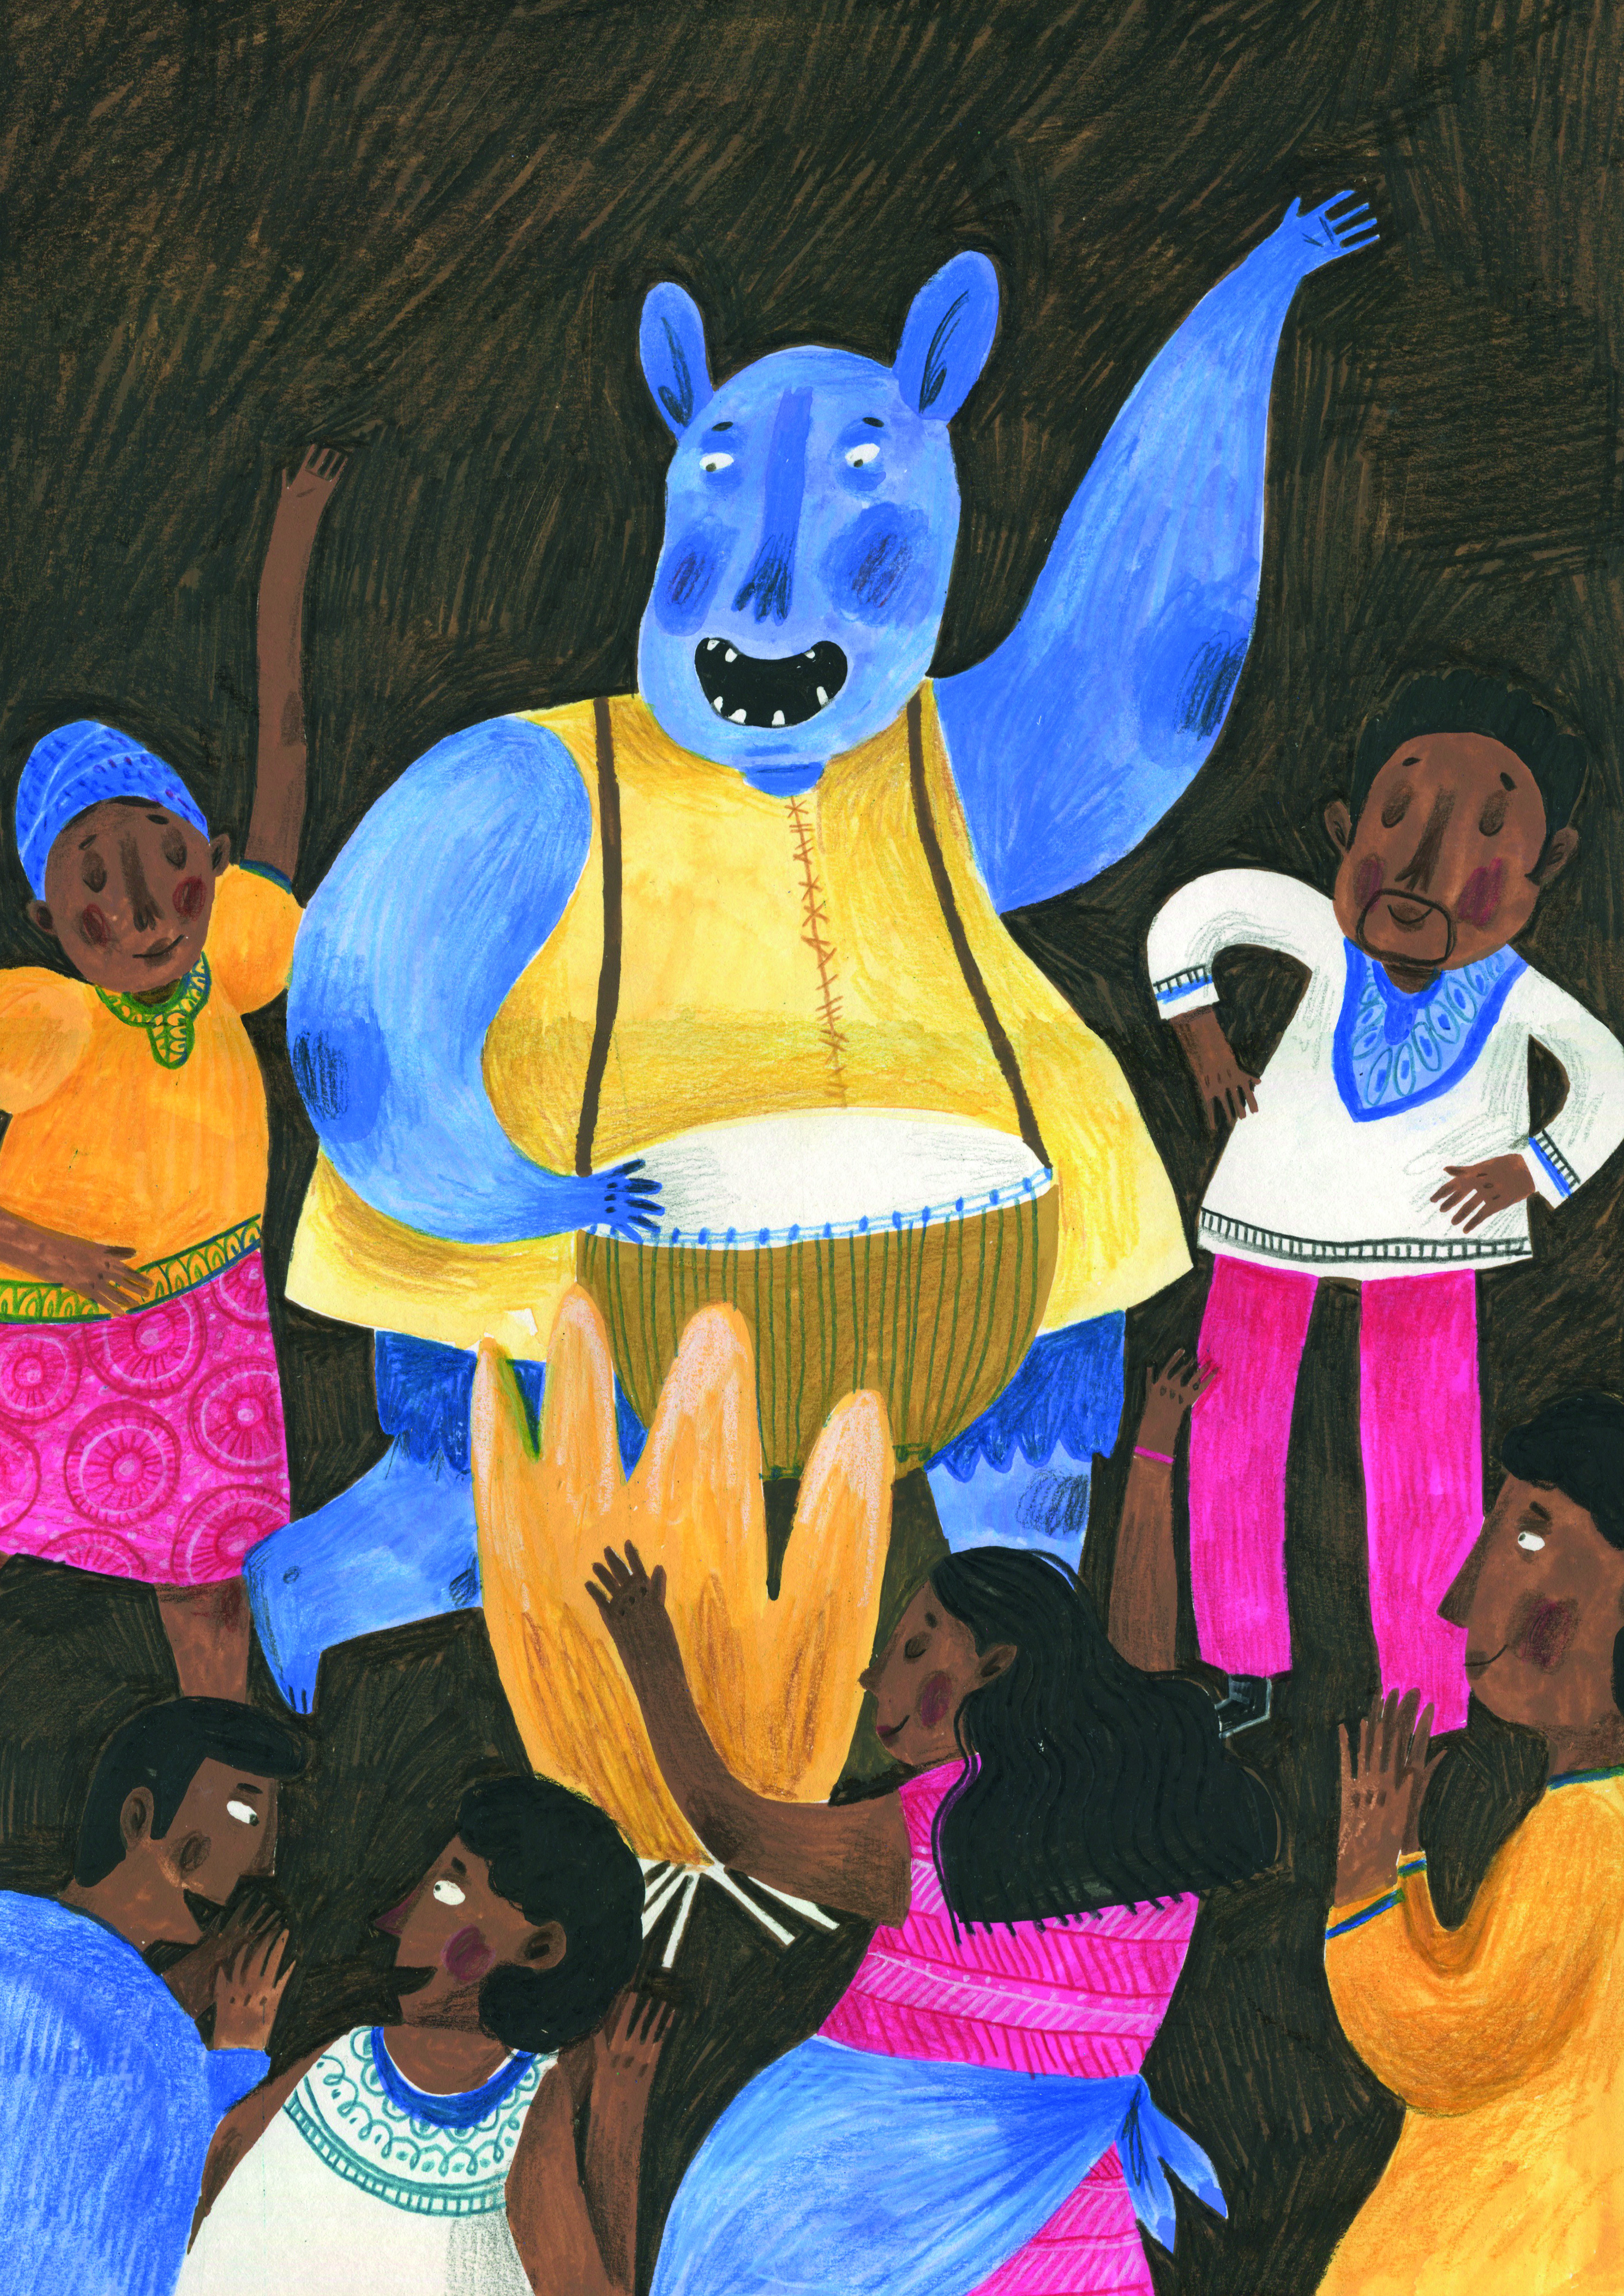 An illustration from the story Tamasha and the Troll showing the troll banging on a drum and people dancing around him